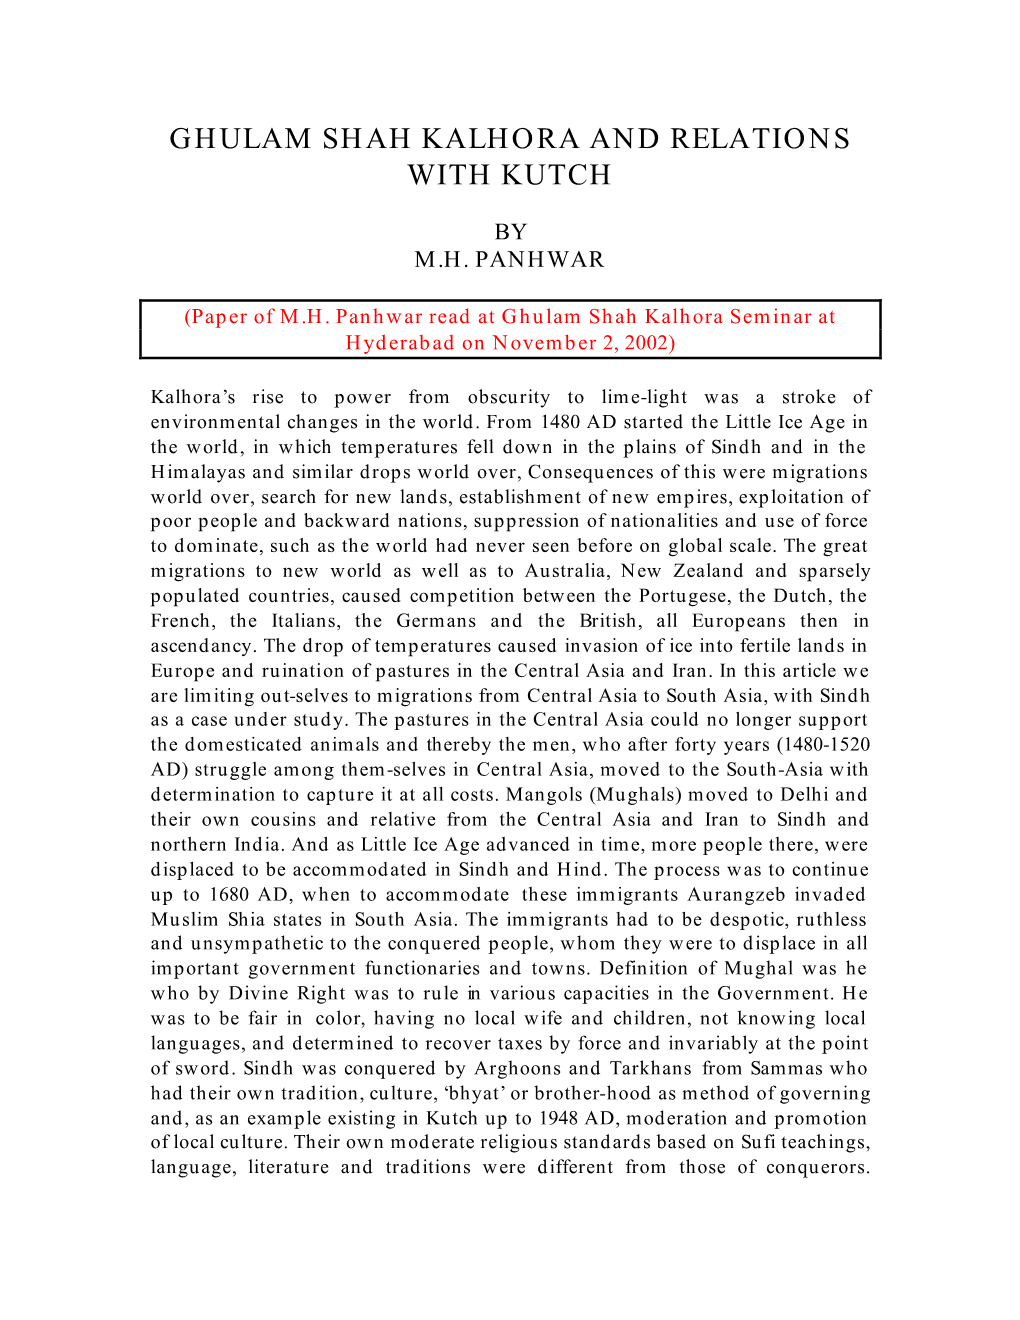 Ghulam Shah Kalhora and Relations with Kutch